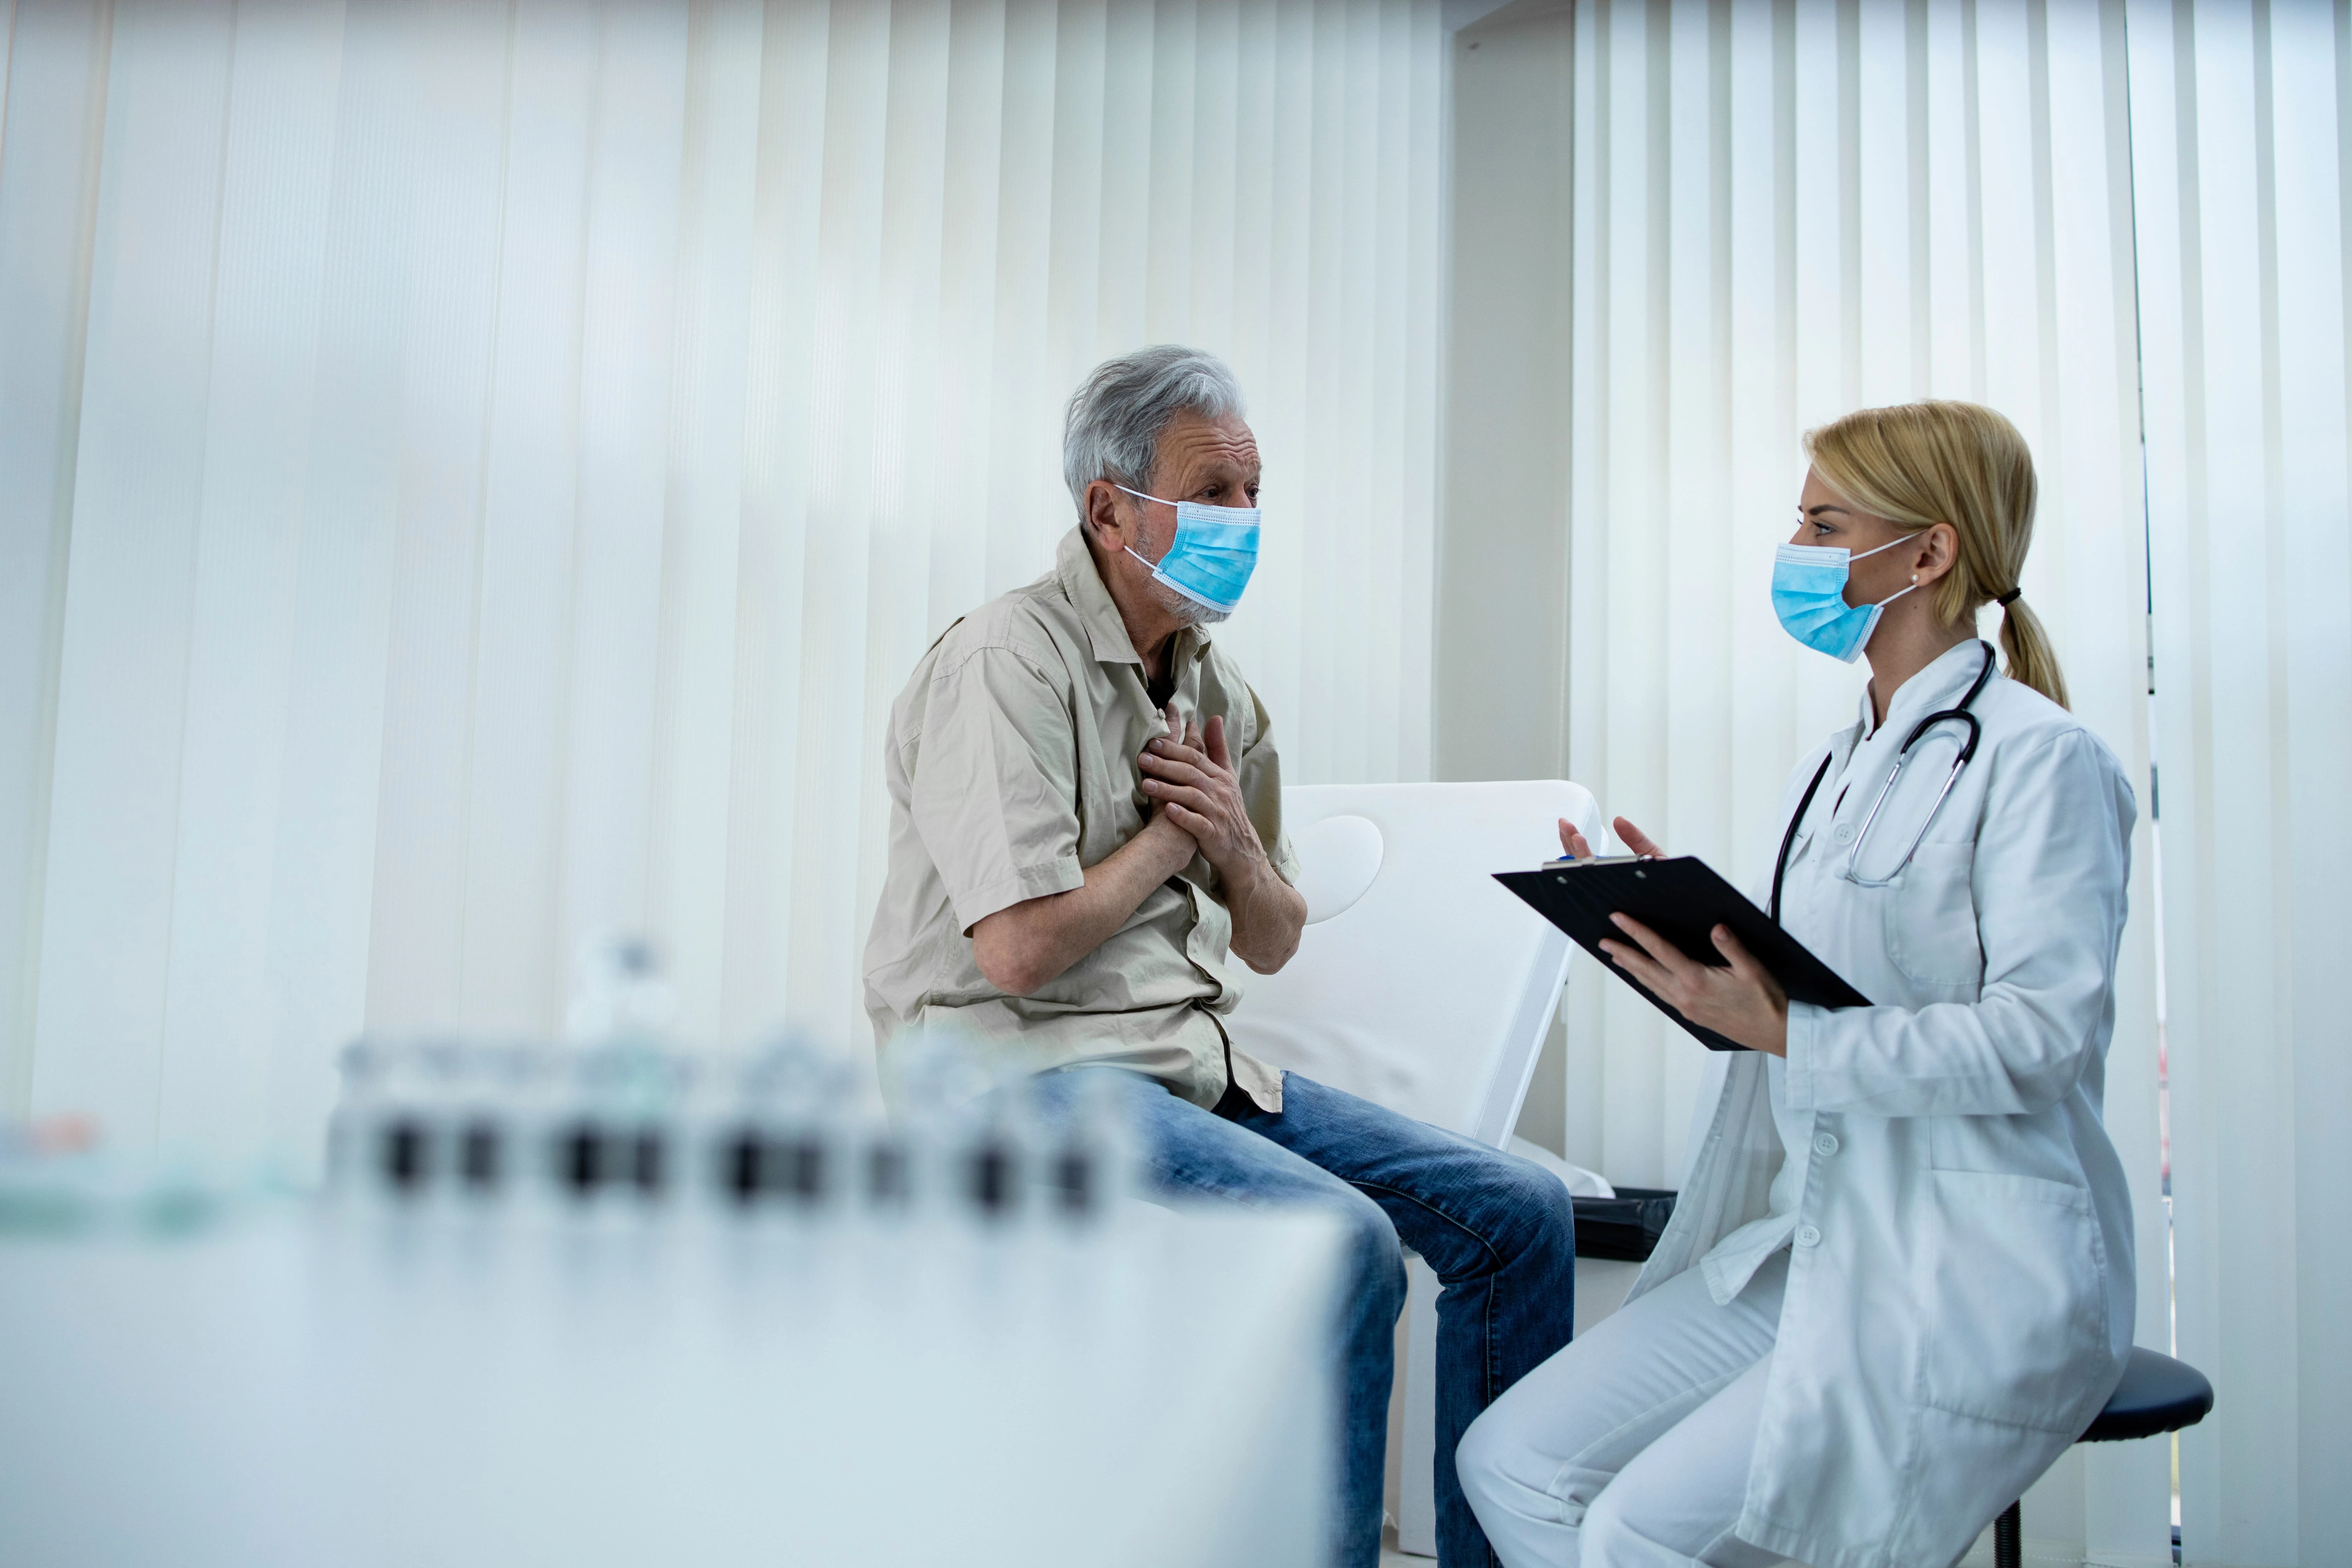 Man holds chest in discomfort during exam with doctor. For complex injuries from toxic exposure or catastrophic injuries, call our experienced injury lawyer in Wyoming today!